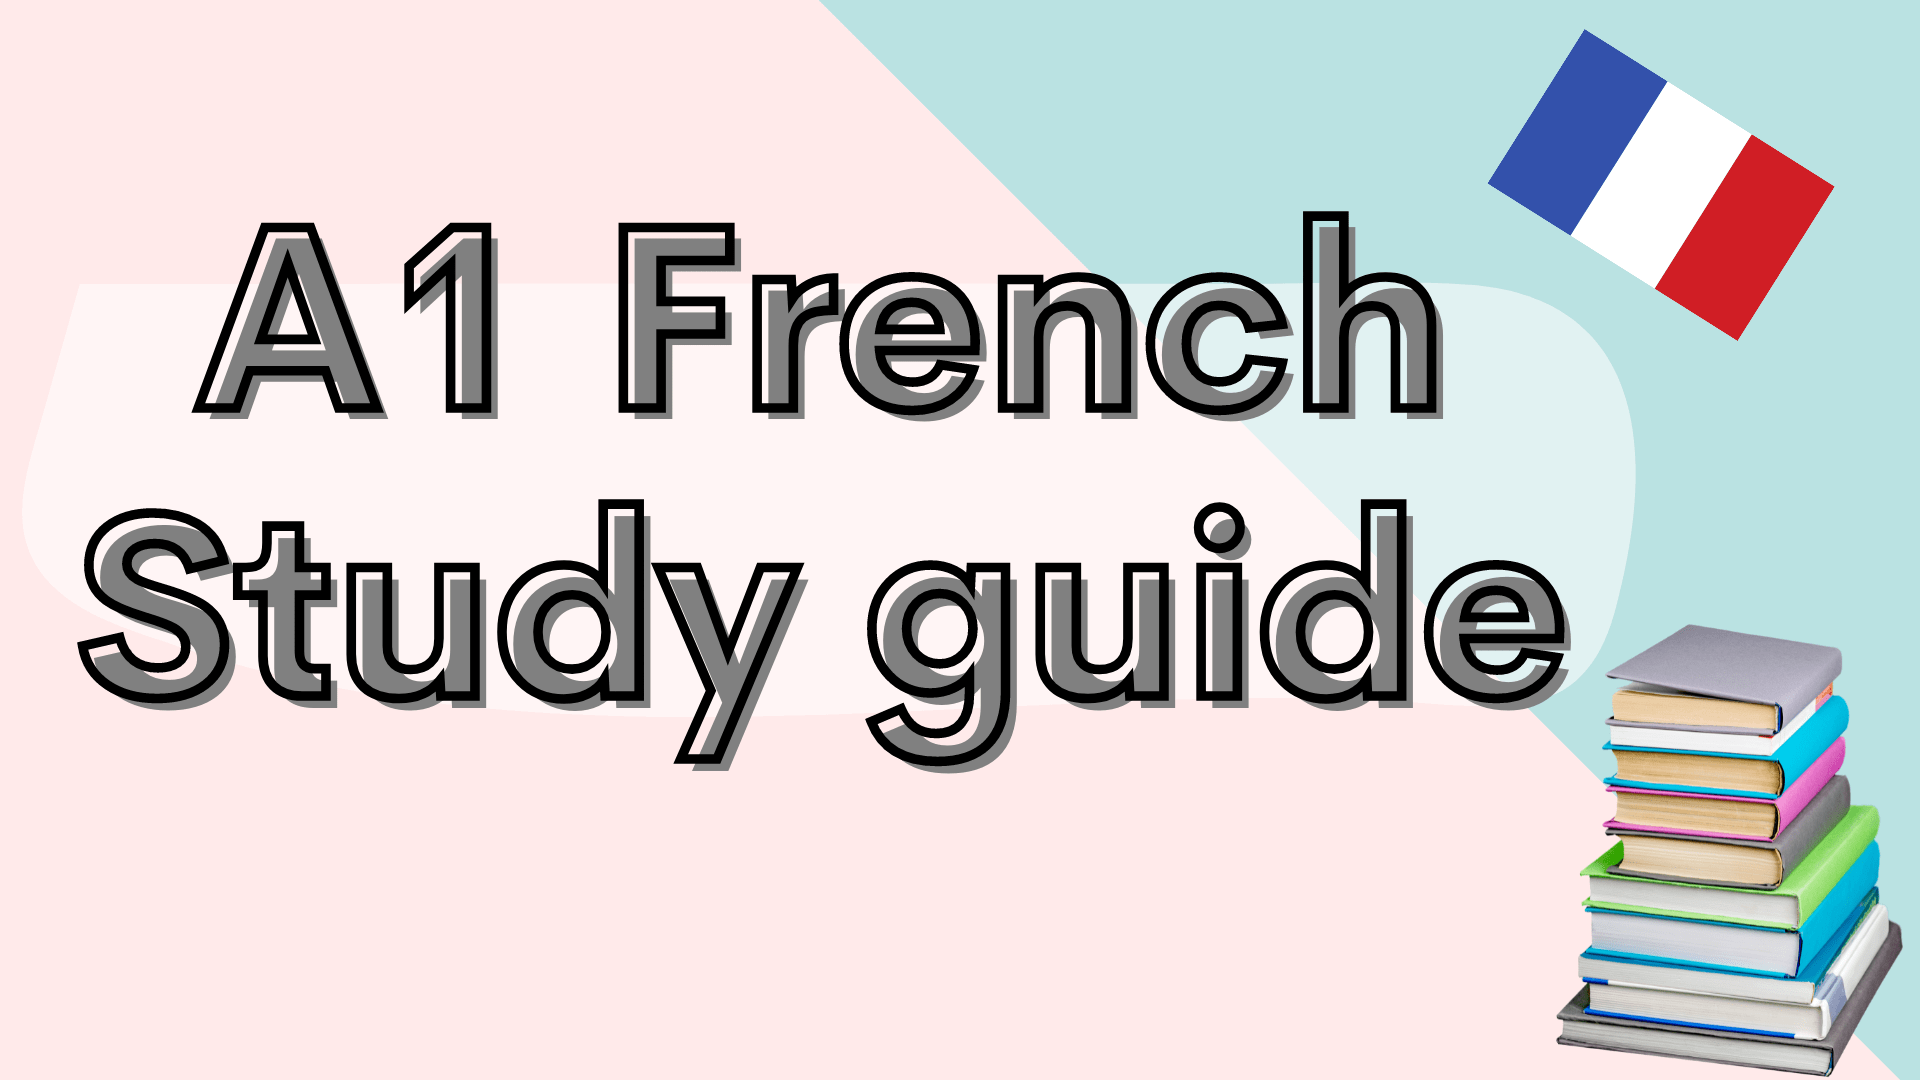 https://learntofrench.com/wp-content/uploads/2022/01/A1-French-Study-guide.png